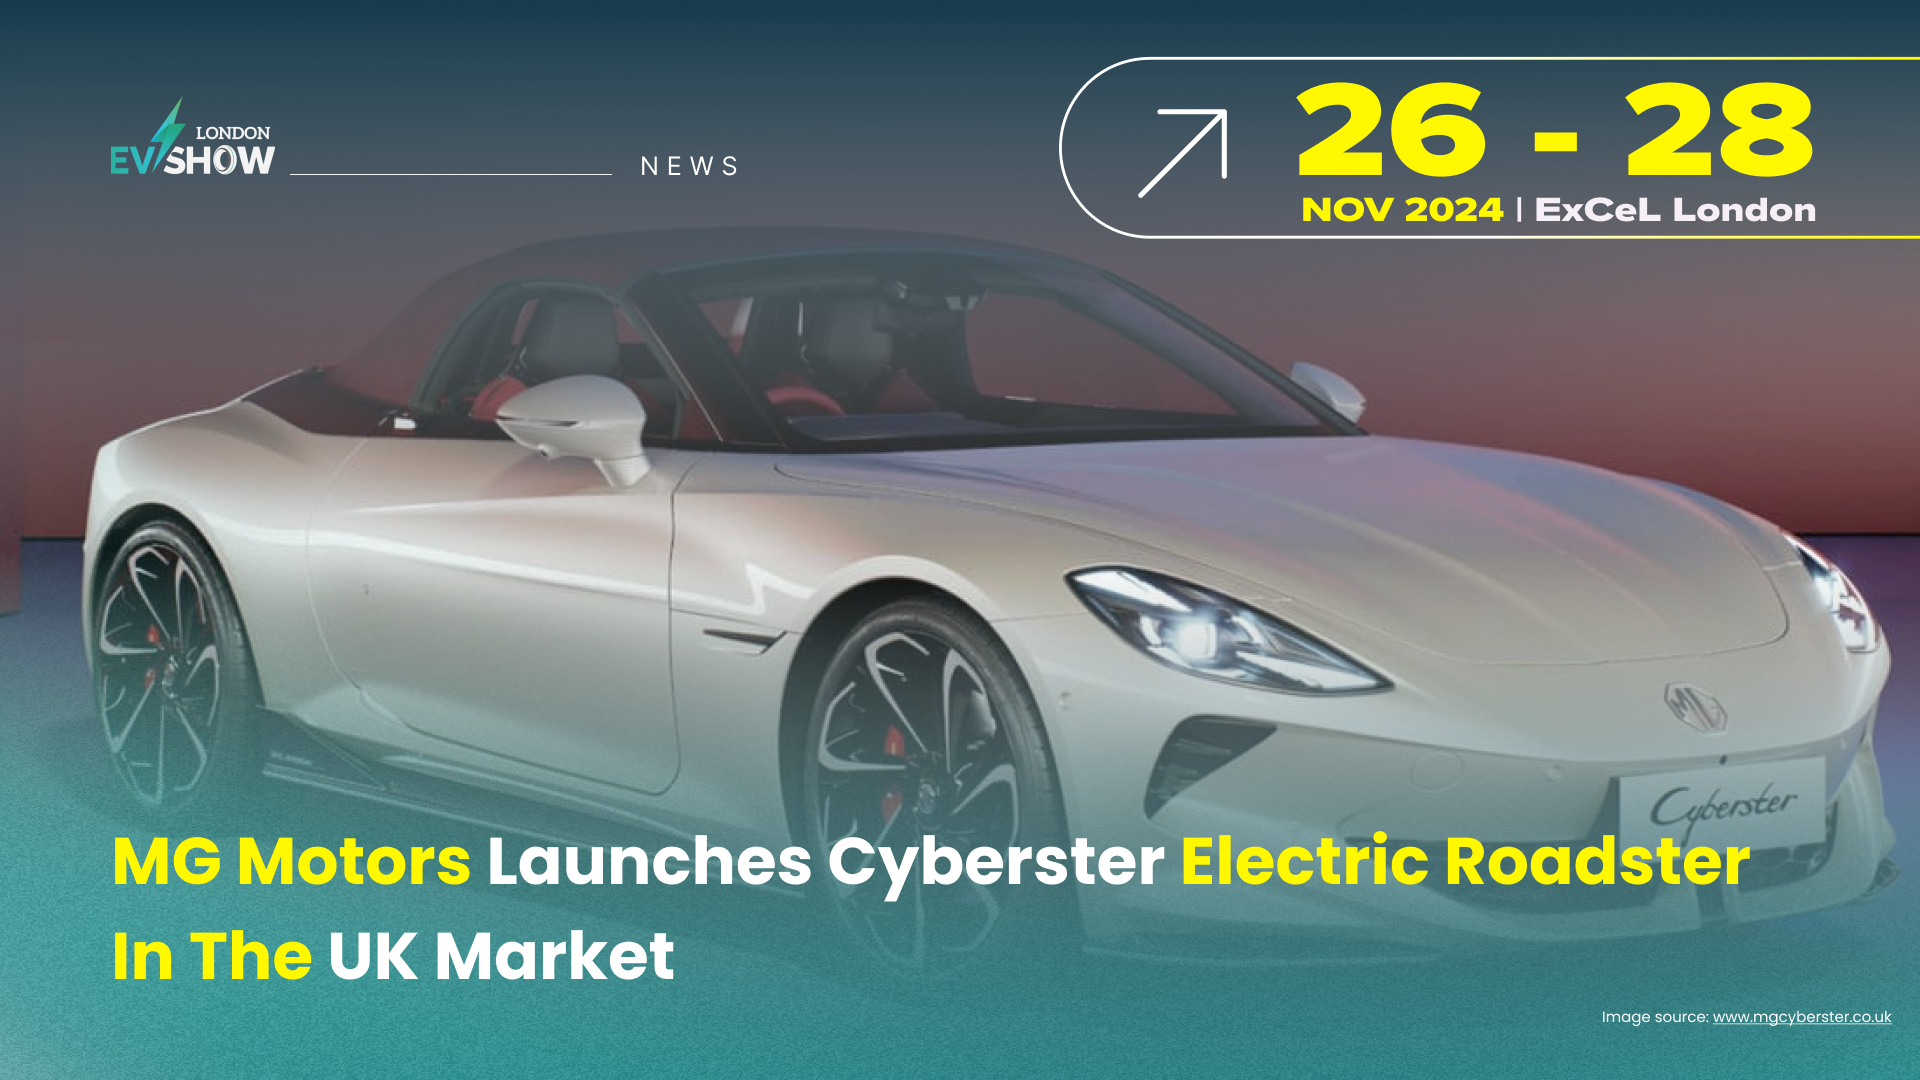 MG Motors Launches Cyberster Electric Roadster In The UK Market